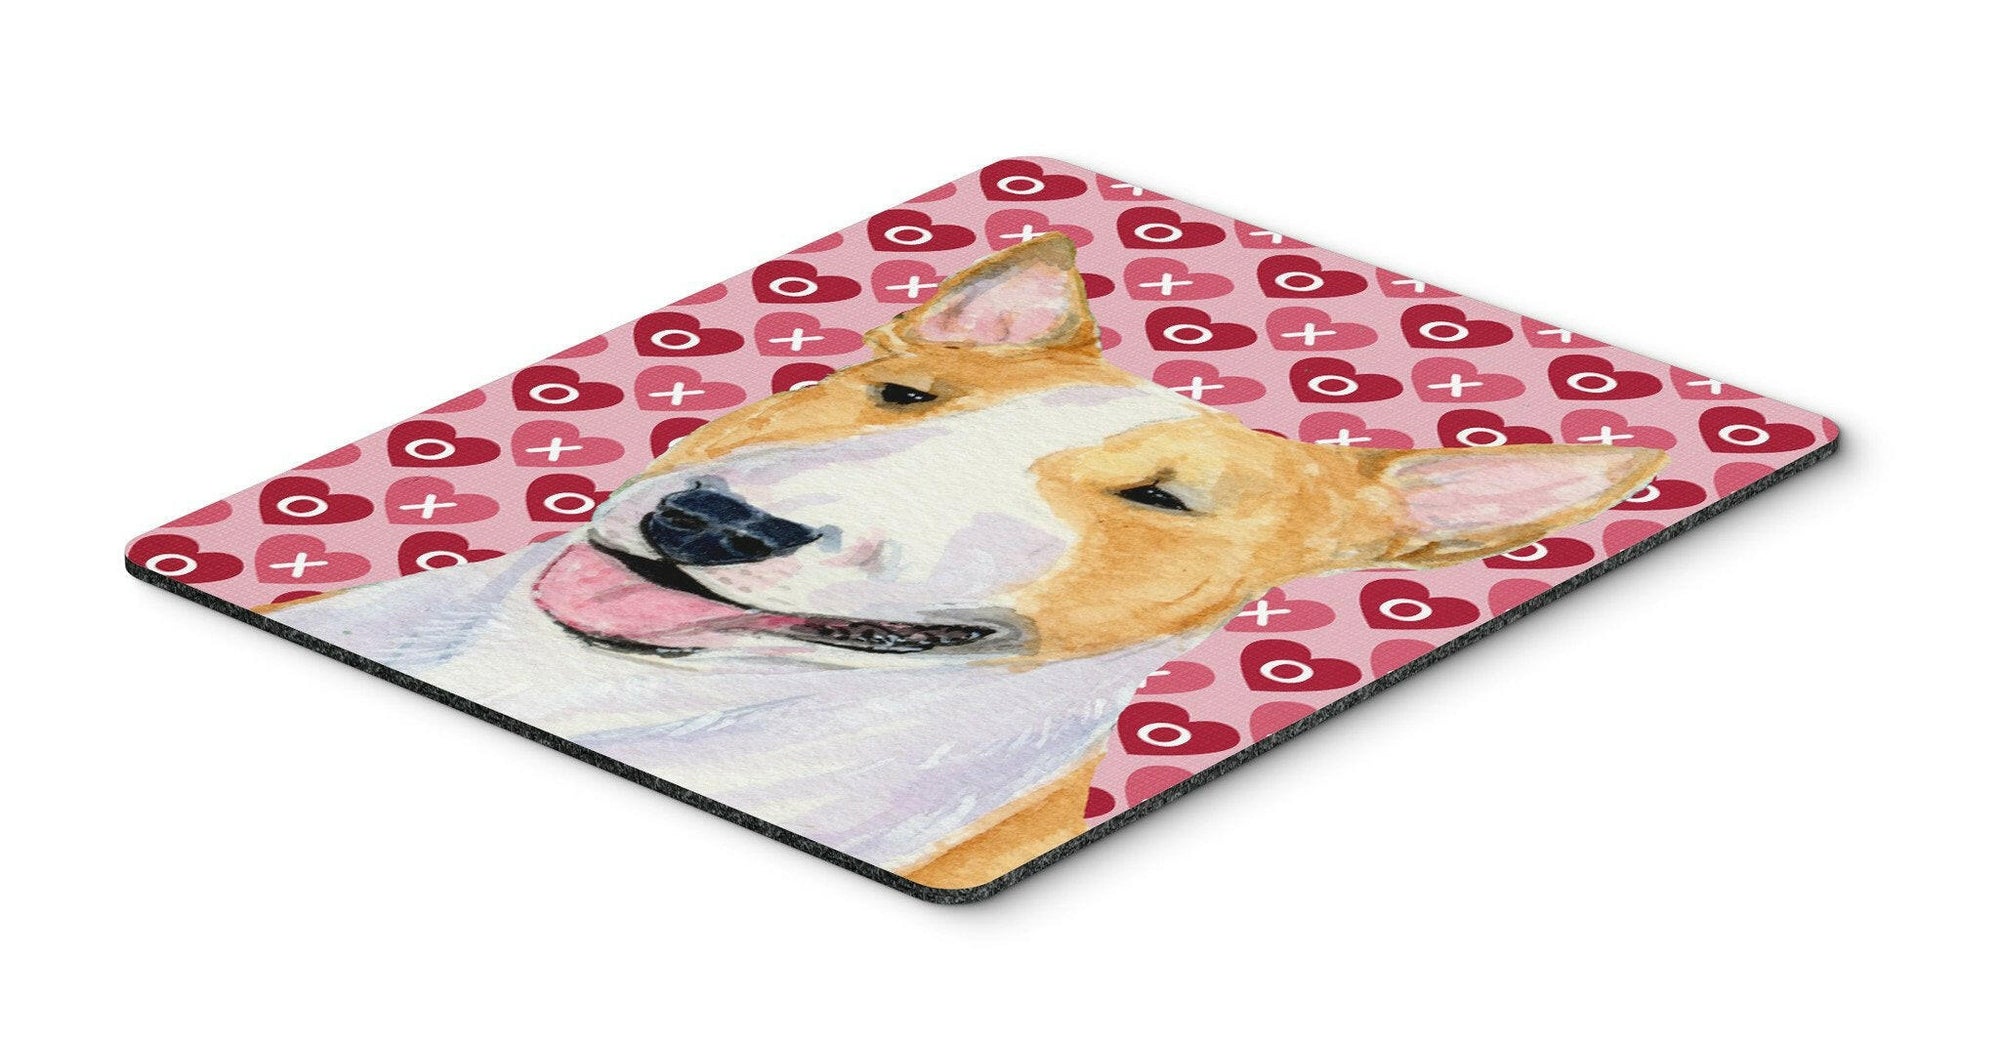 Bull Terrier Hearts Love and Valentine's Day Mouse Pad, Hot Pad or Trivet by Caroline's Treasures